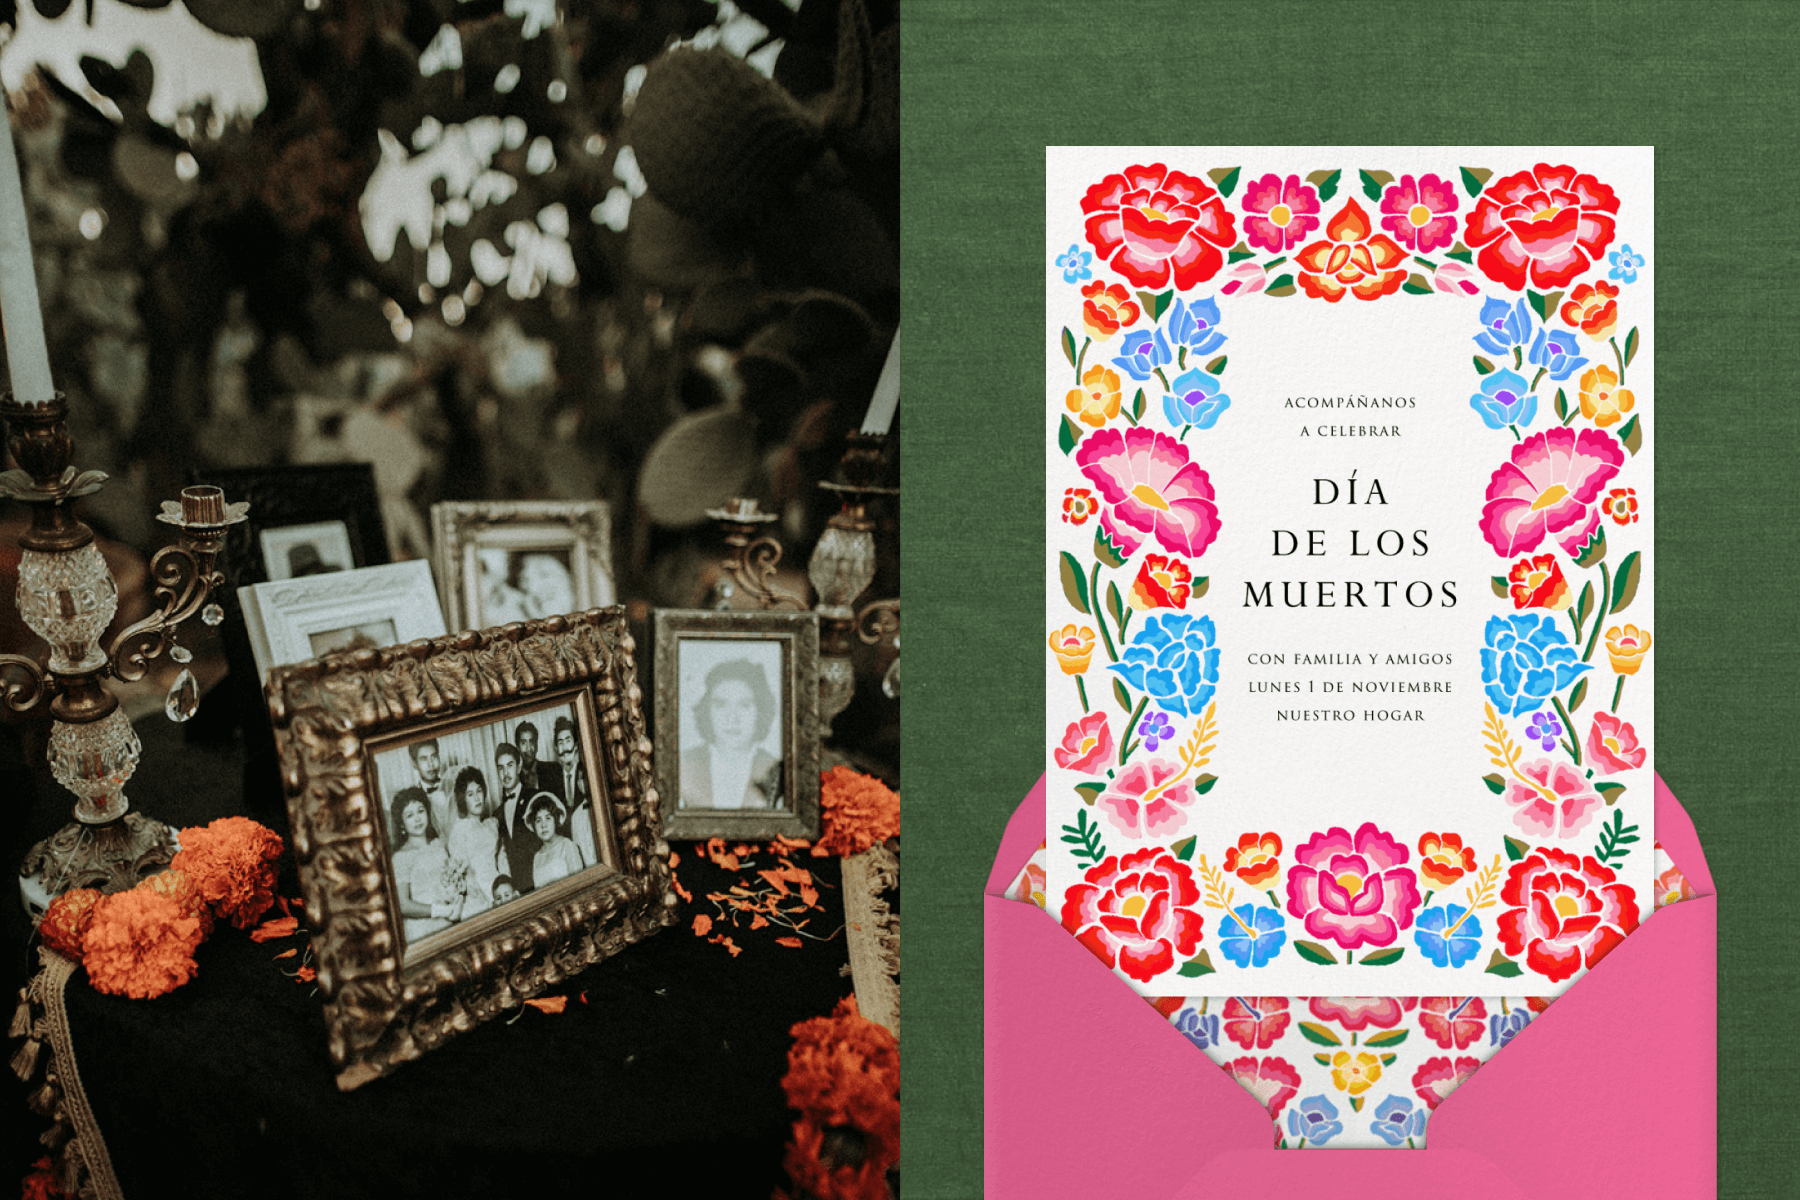 Left: A collection of framed family photos with marigolds and candlesticks; Right: A Dia de Muertos invitation with a frame of pink and blue flowers.